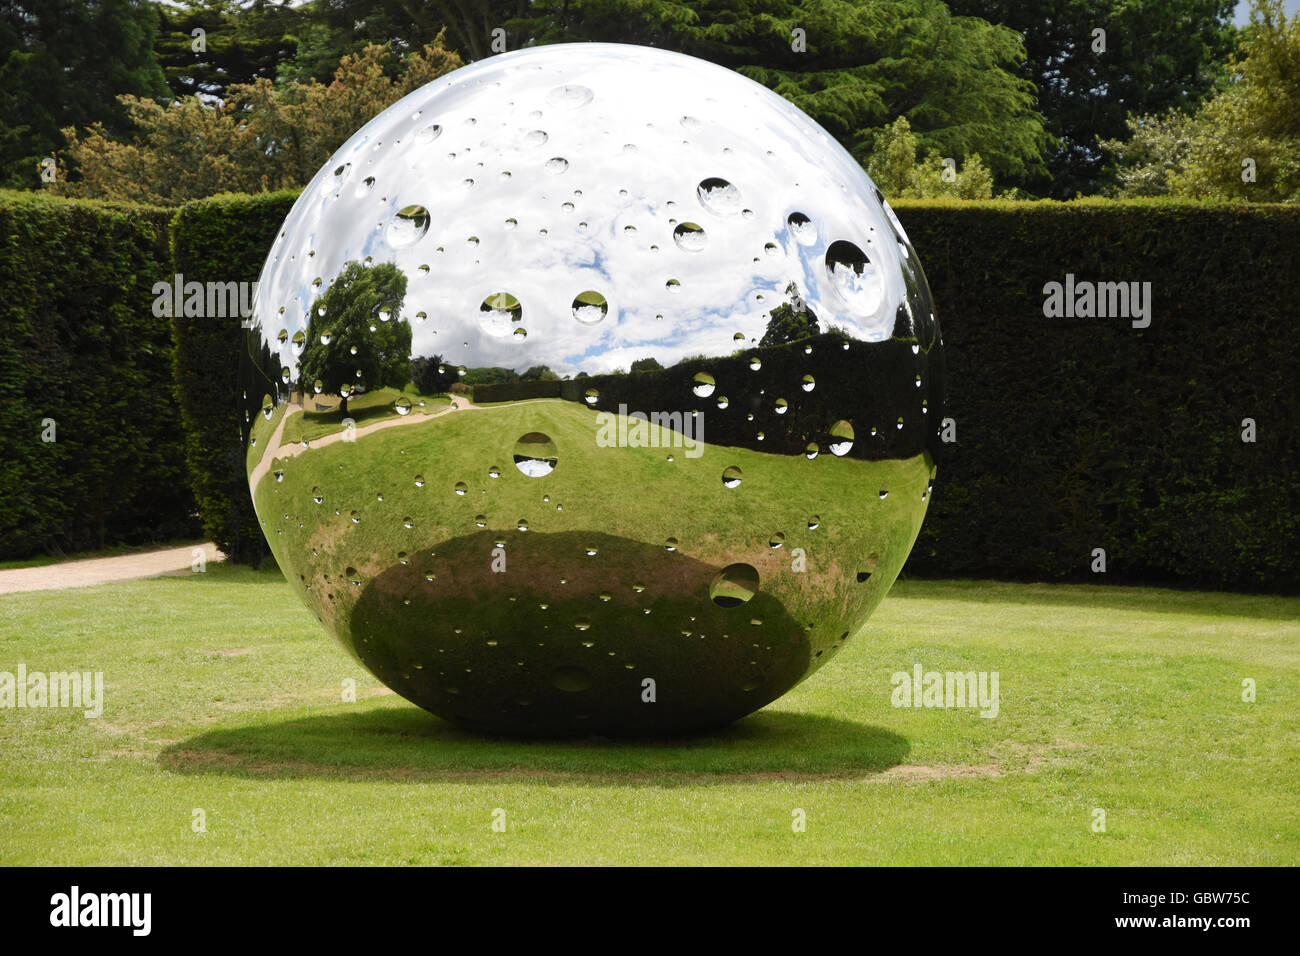 'Moon' a stainless steel sculpture by Not Vital, displayed in the grounds of the Yorkshire Sculpture Park, UK. (2016) Stock Photo